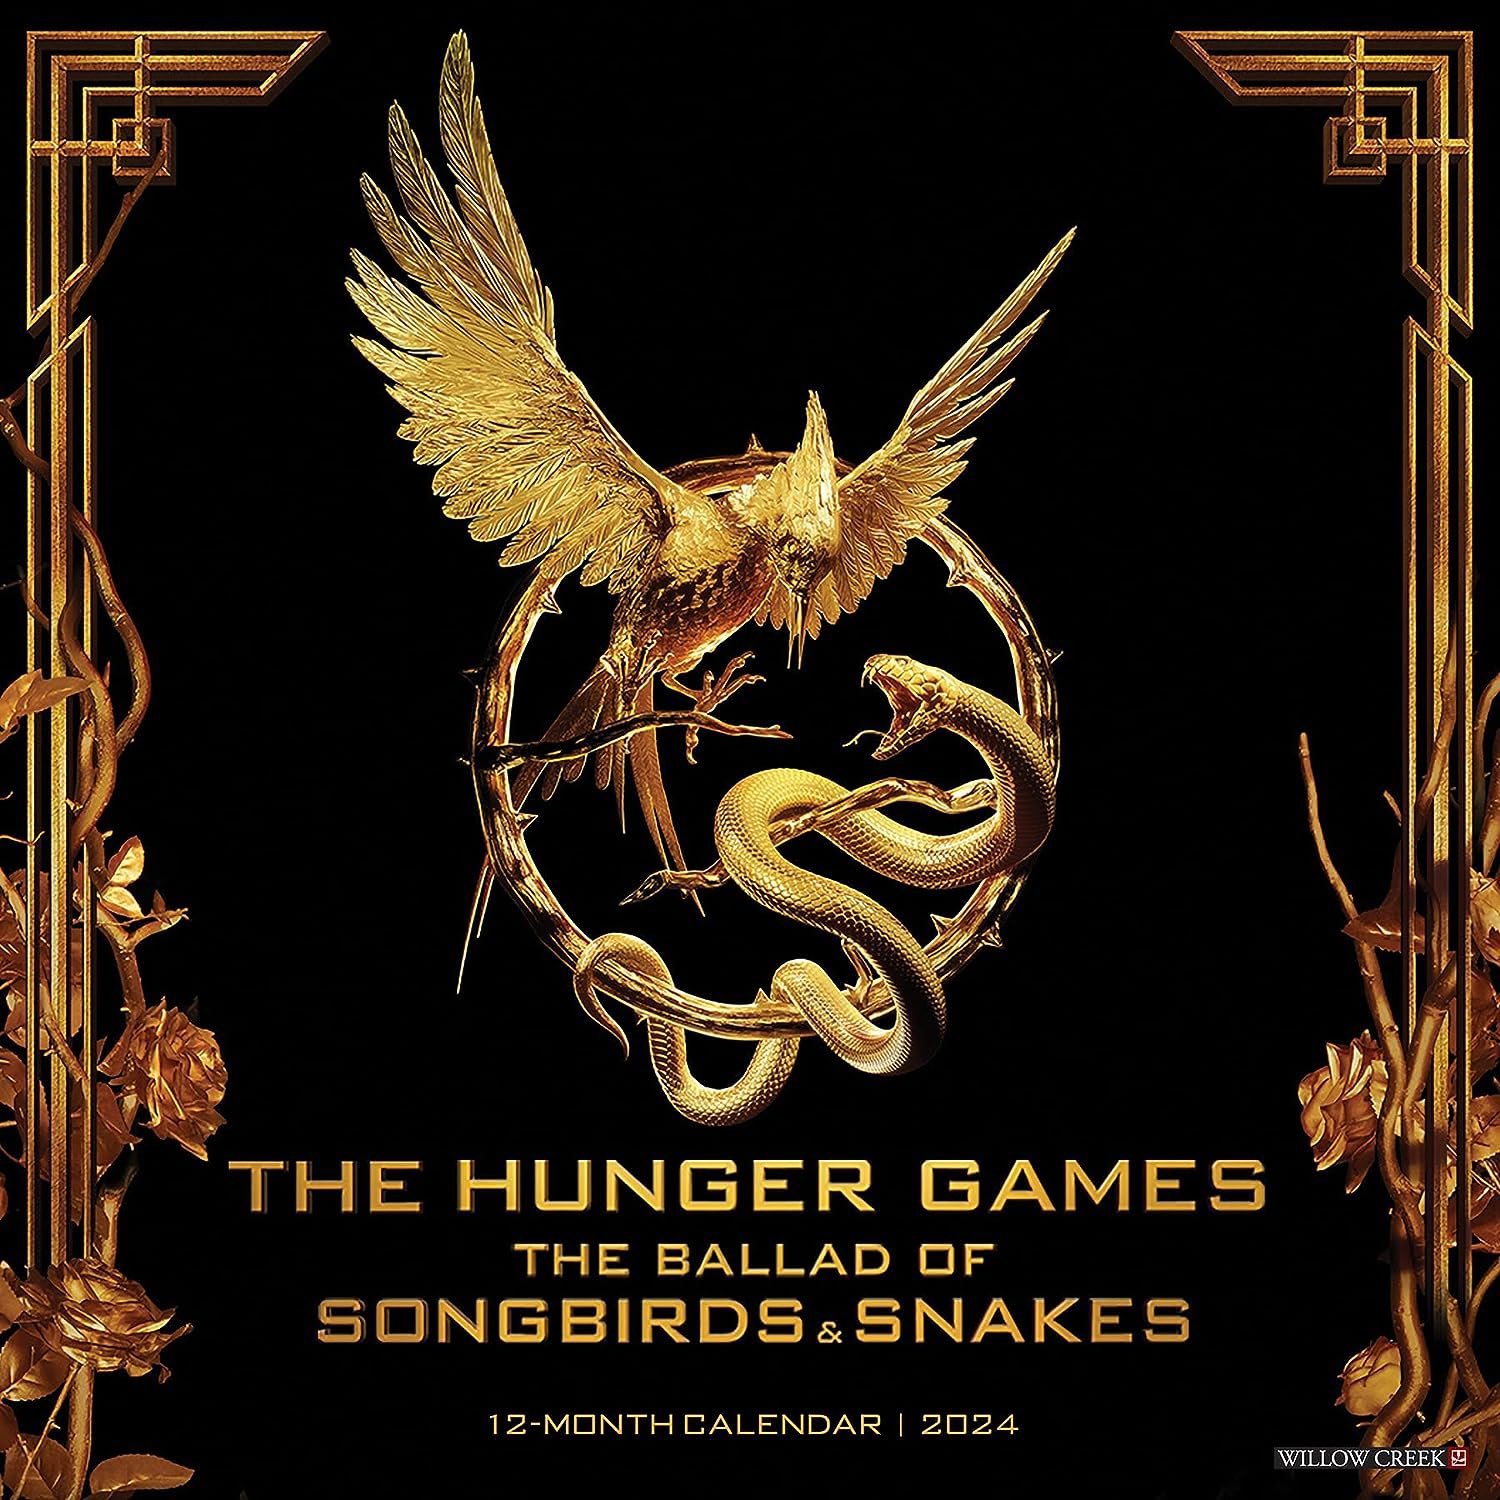 The Hunger Games image from The Ballad of Songbirds & Snakes 2024 Calendar